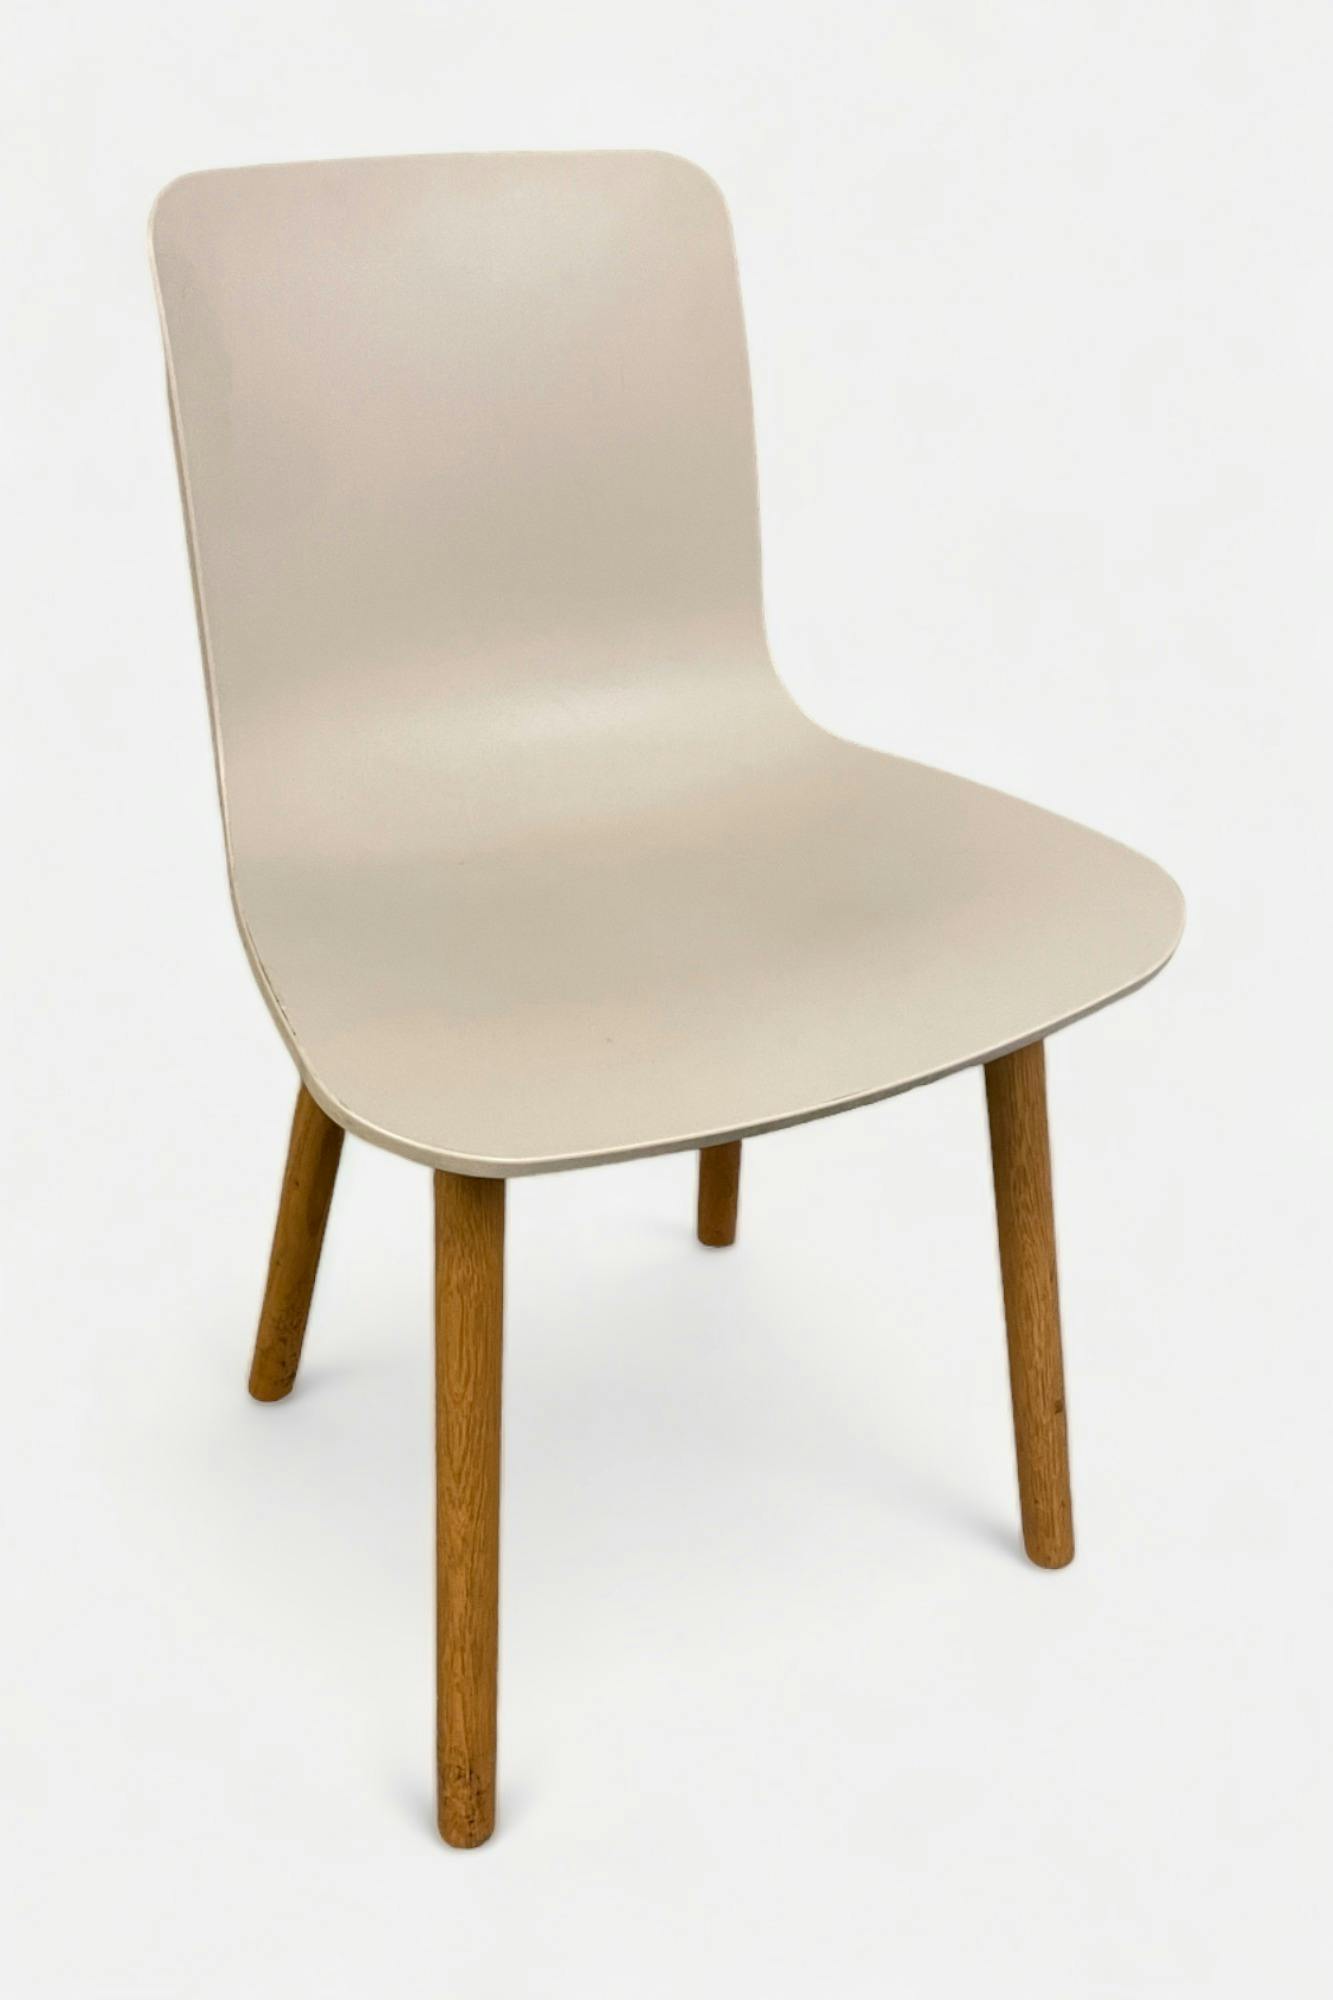 Vitra grey chair with wooden legs - Relieve Furniture